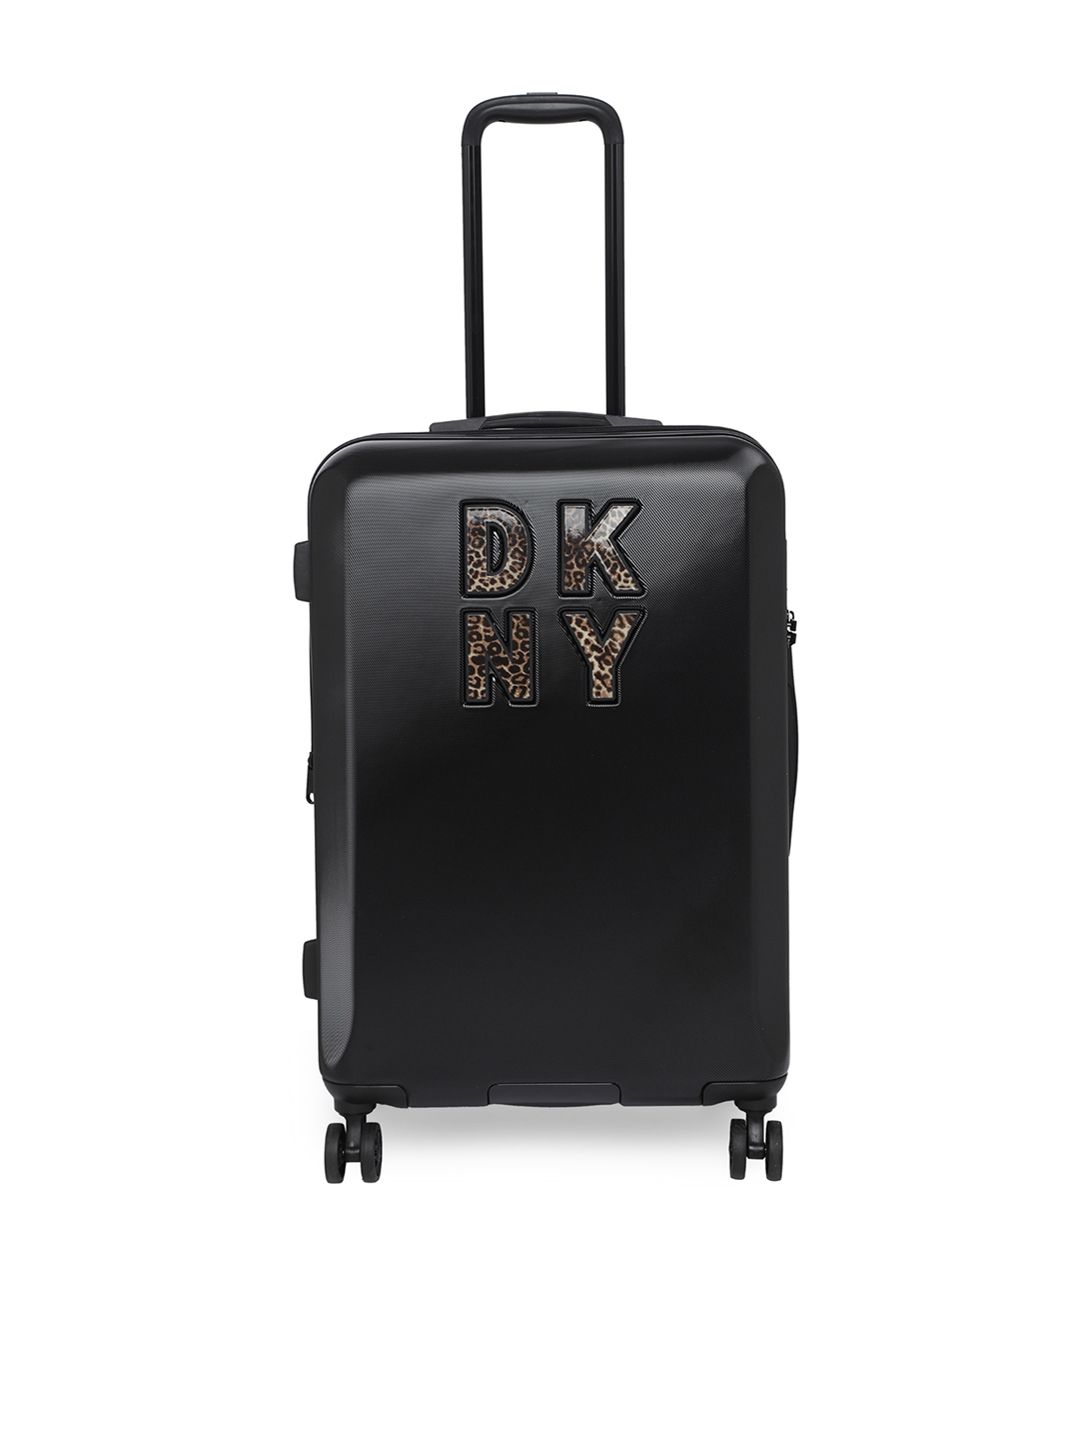 DKNY Black Solid Hard-Sided Medium Trolley Suitcase Price in India